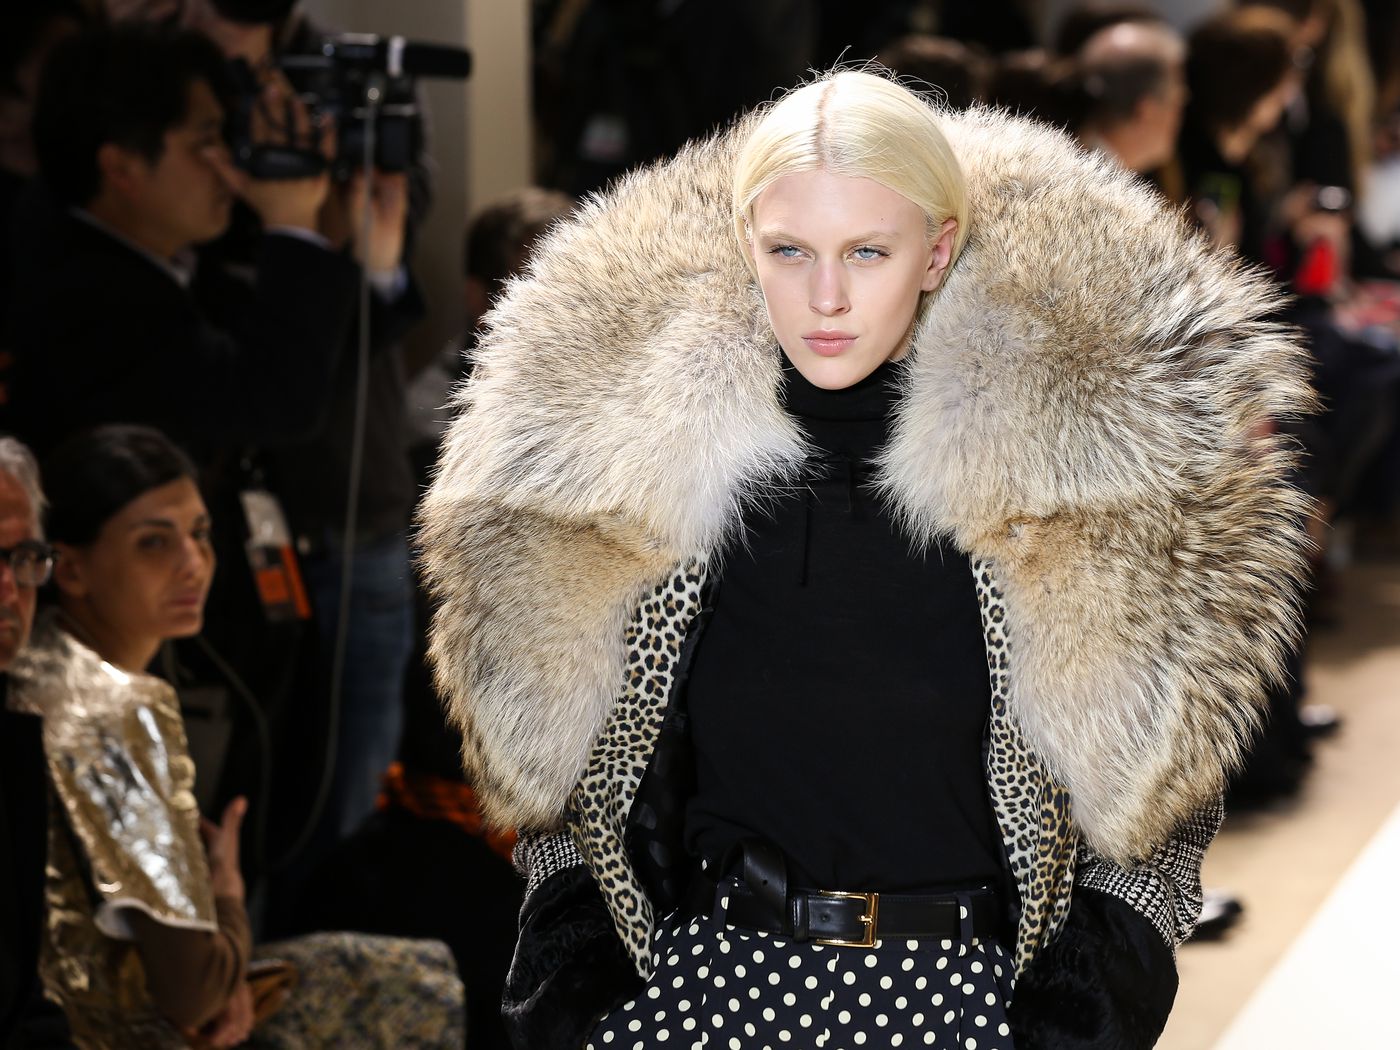 It's 2015. Fashion Is Full of Vegans. So Why Is Fur Still Trendy? - Racked